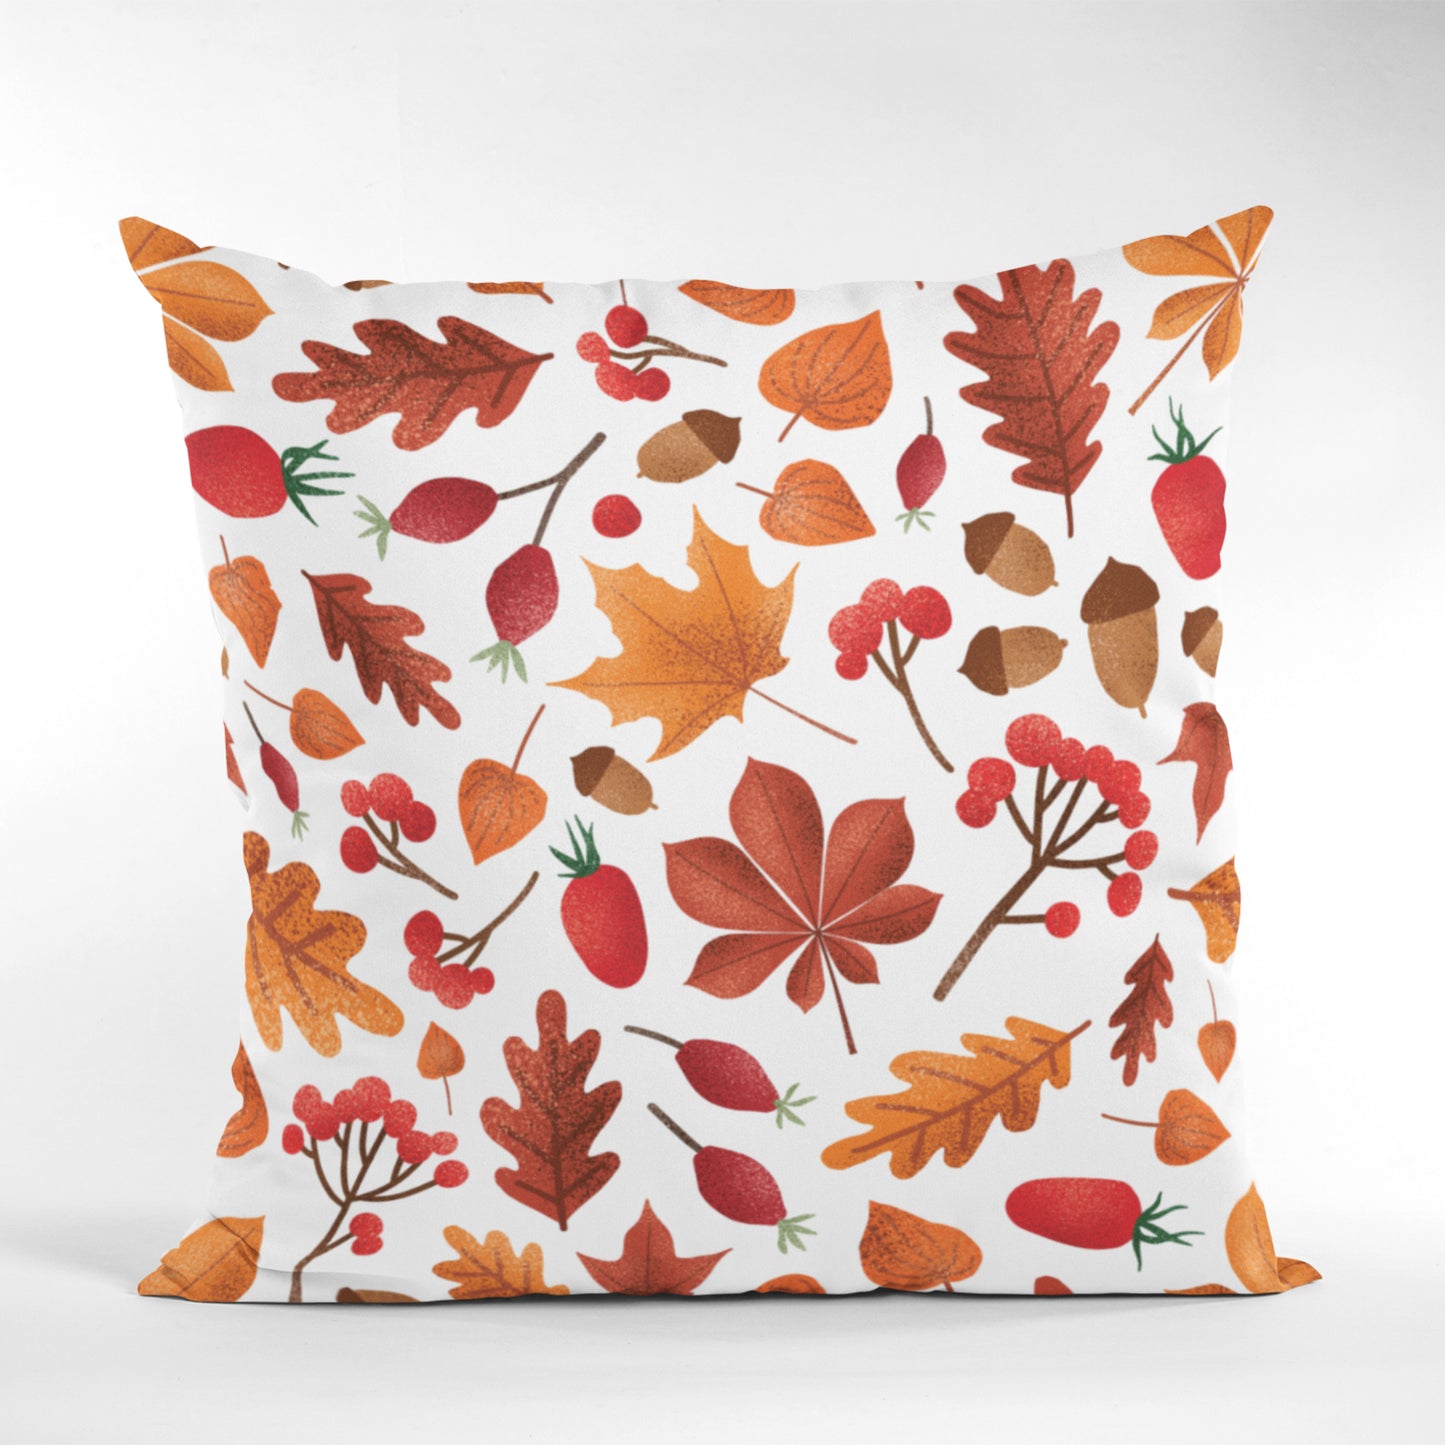 Fall Leaves Pillow Cover, Autumn Living Room Decor Pillow Case by Homeezone